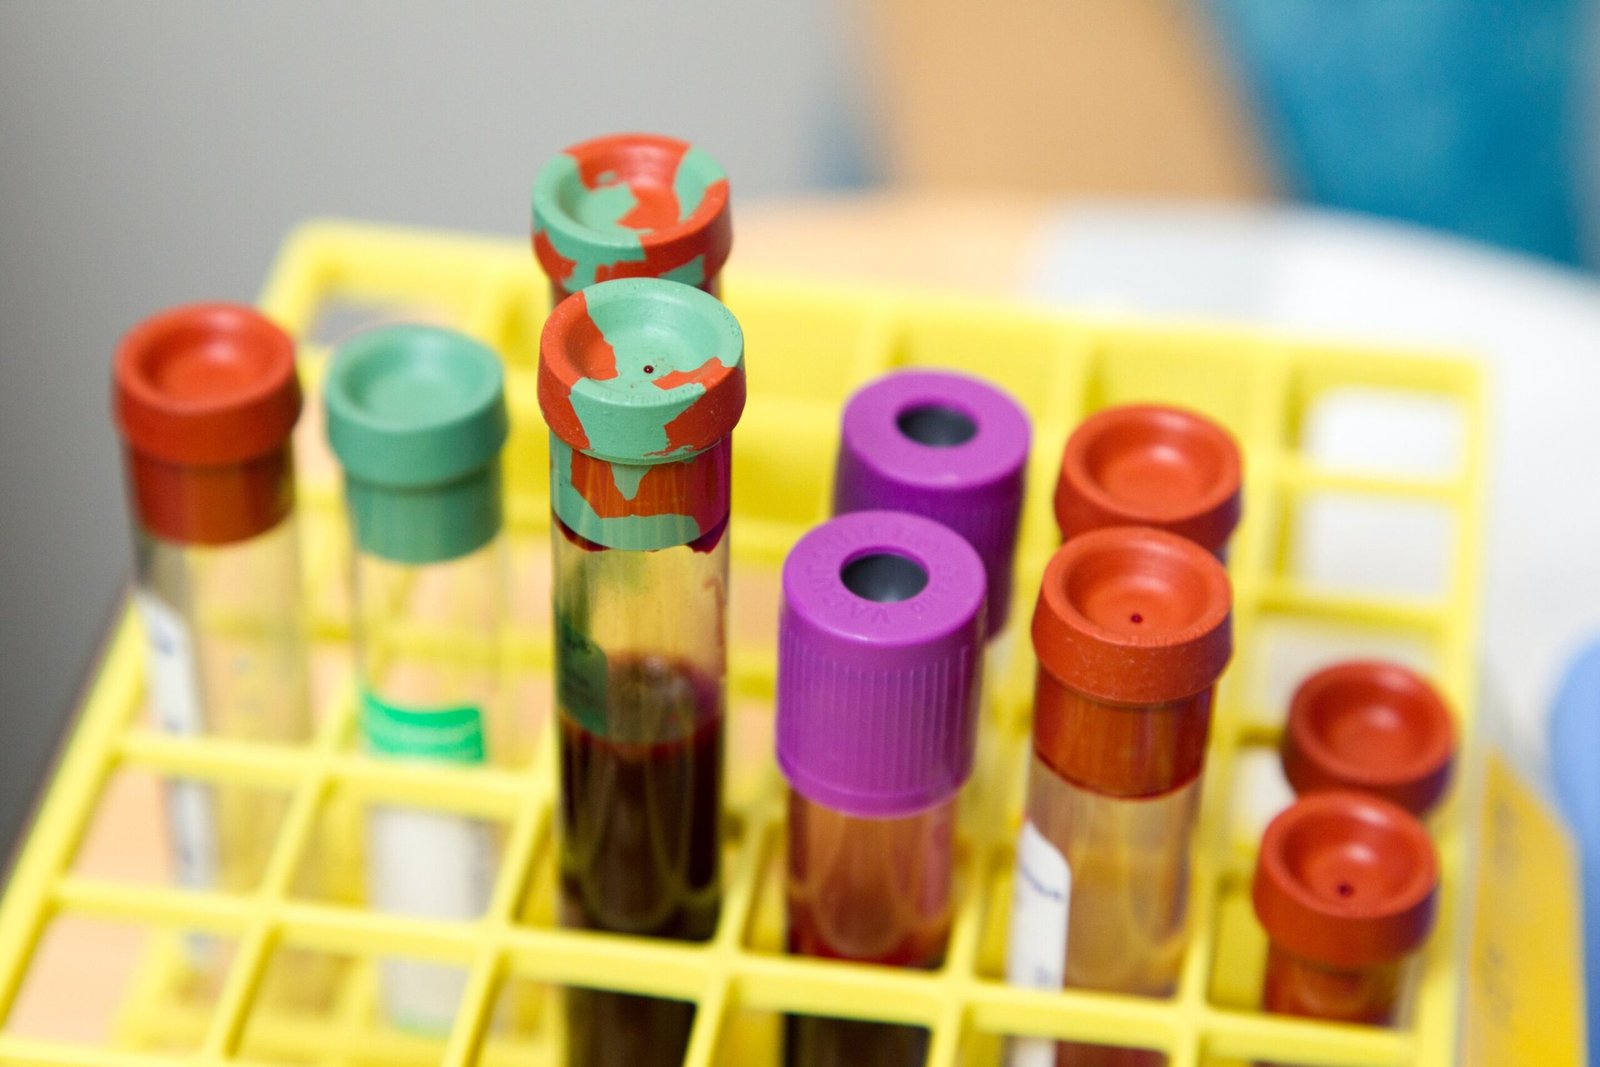 Alzheimers blood test found to perform as well as FDA approved spinal fluid tests